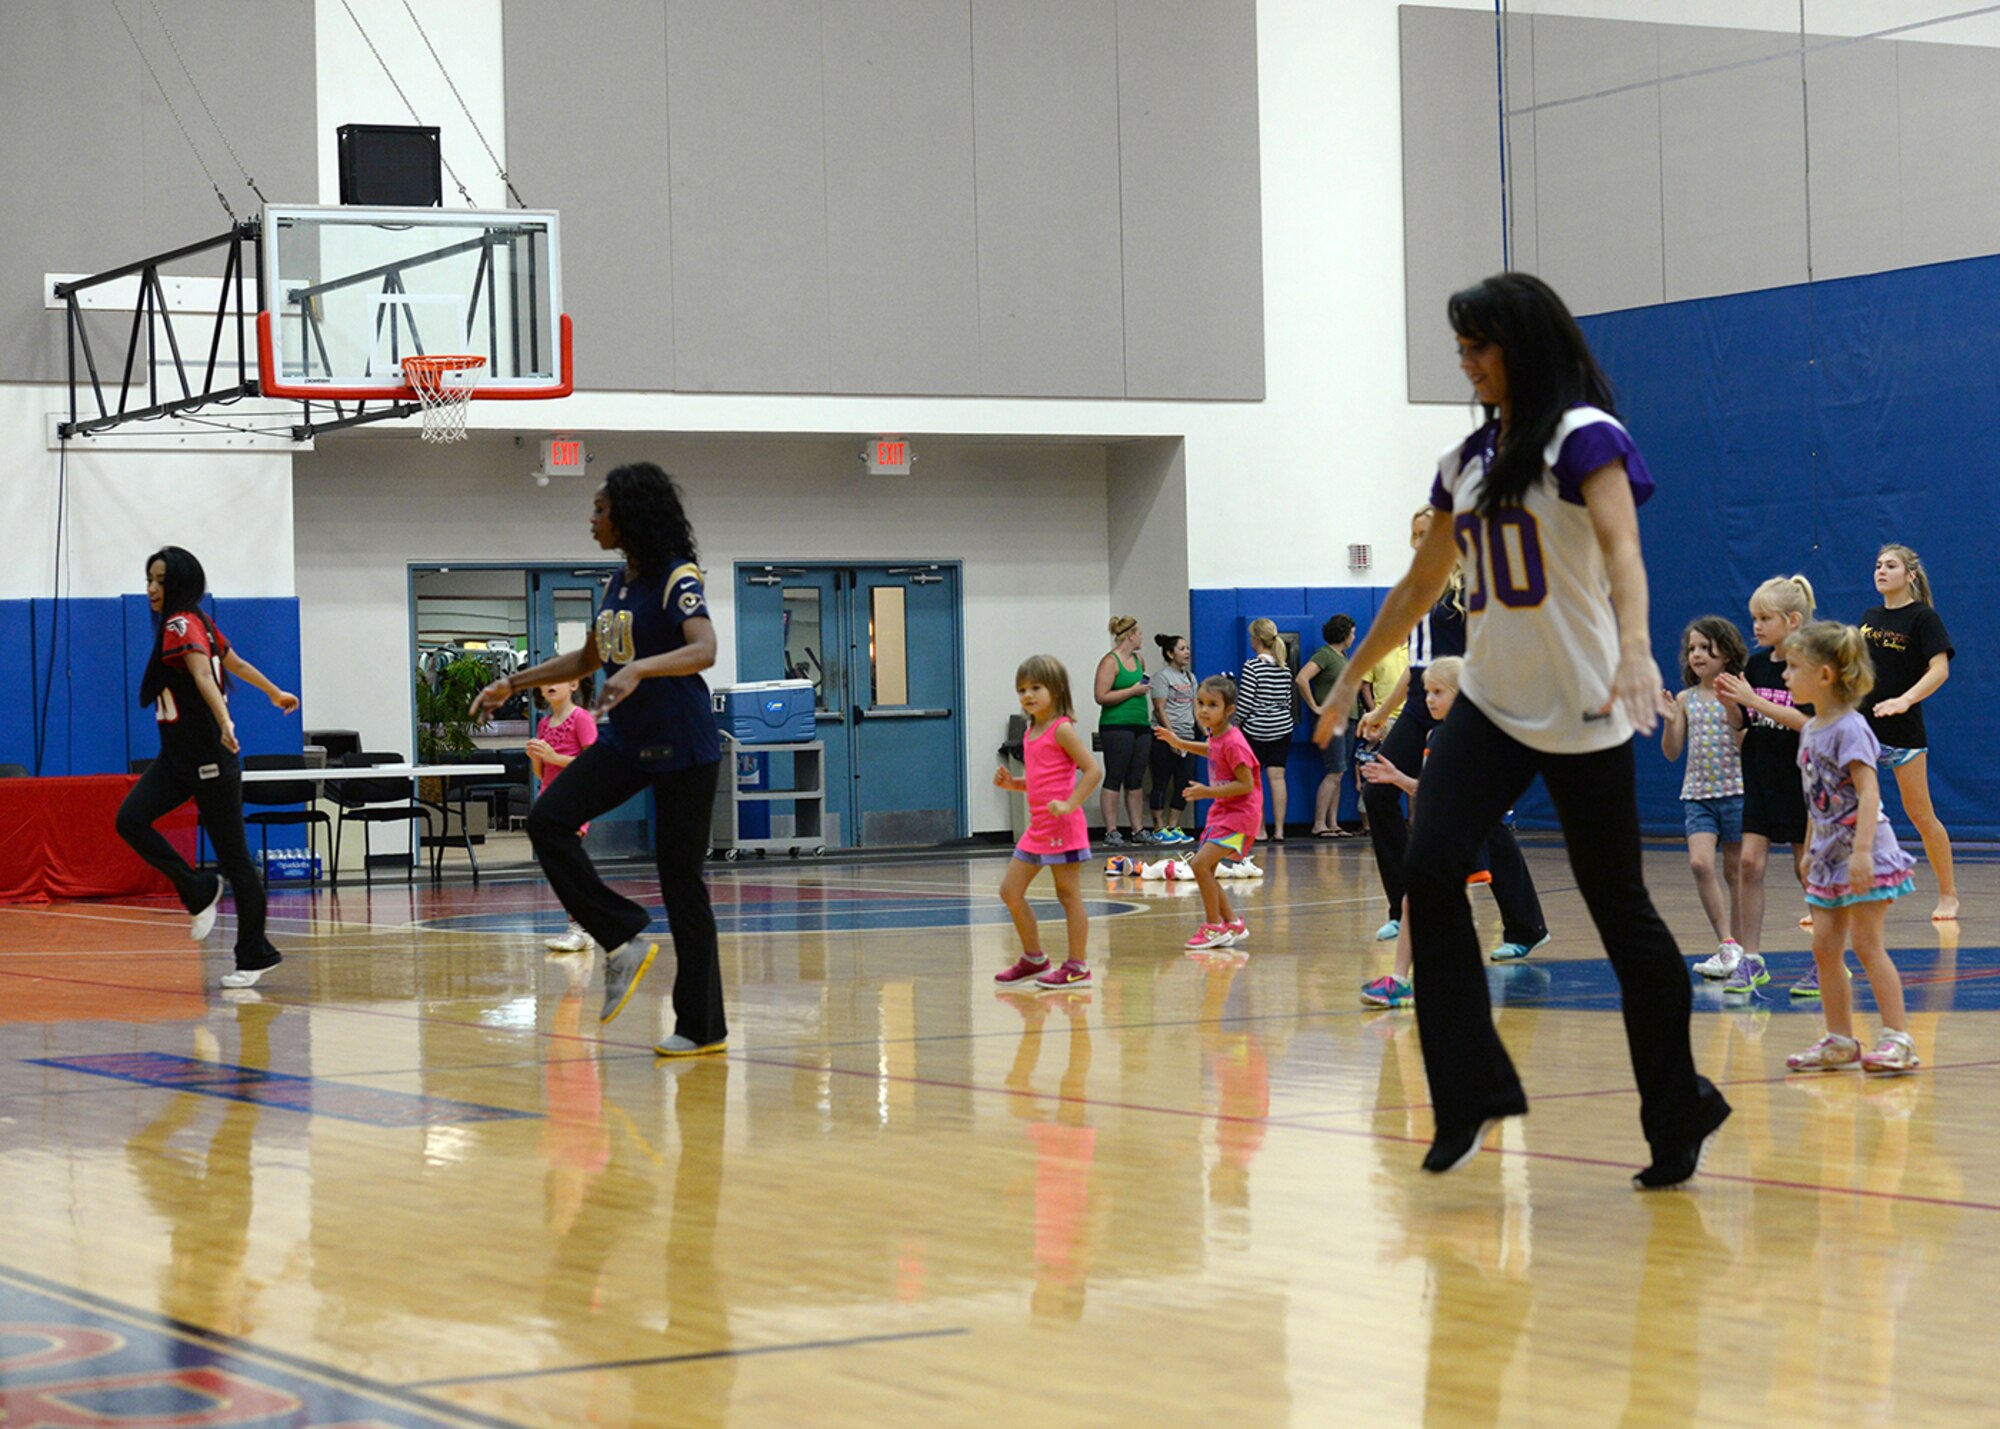 National Football League cheerleaders from the Atlanta Falcons, St. Louis Rams and Minnesota Vikings lead children through a cheer clinic Feb. 1, 2015, at the Coral Reef Fitness Center at Andersen Air Force Base, Guam. The cheerleaders visited Andersen as part of the Department of Defense’s Armed Forces Entertainment Guam Super Bowl tour that brought the cheerleaders, NFL mascots and two former NFL players to the island for two days to meet military members and watch the Super Bowl Feb. 3 at Andersen and Naval Base Guam. (U.S. Air Force photo by Tech. Sgt. Zachary Wilson/Released)